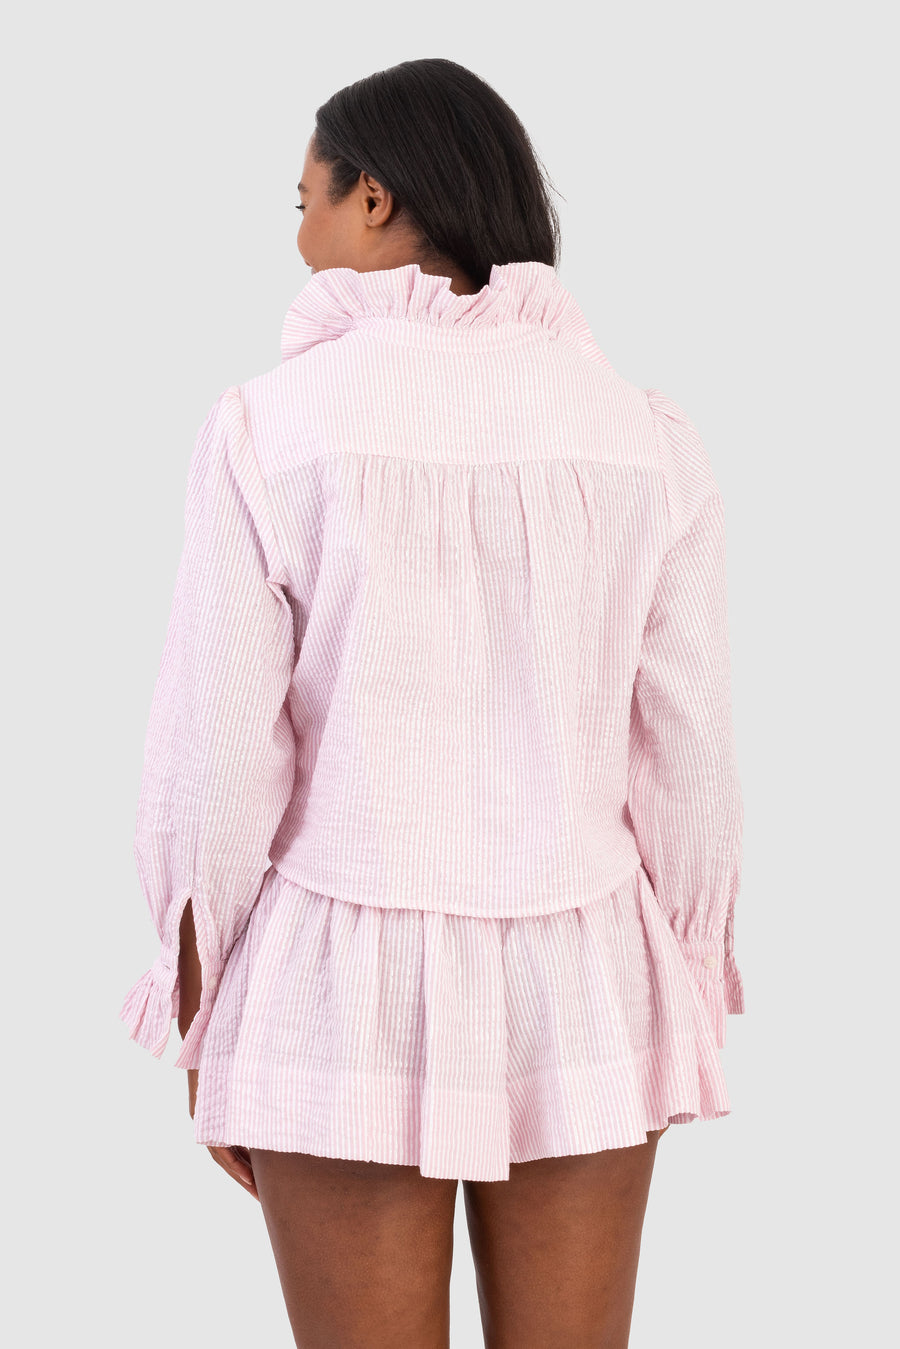 Penelope Top French Pink Stripe